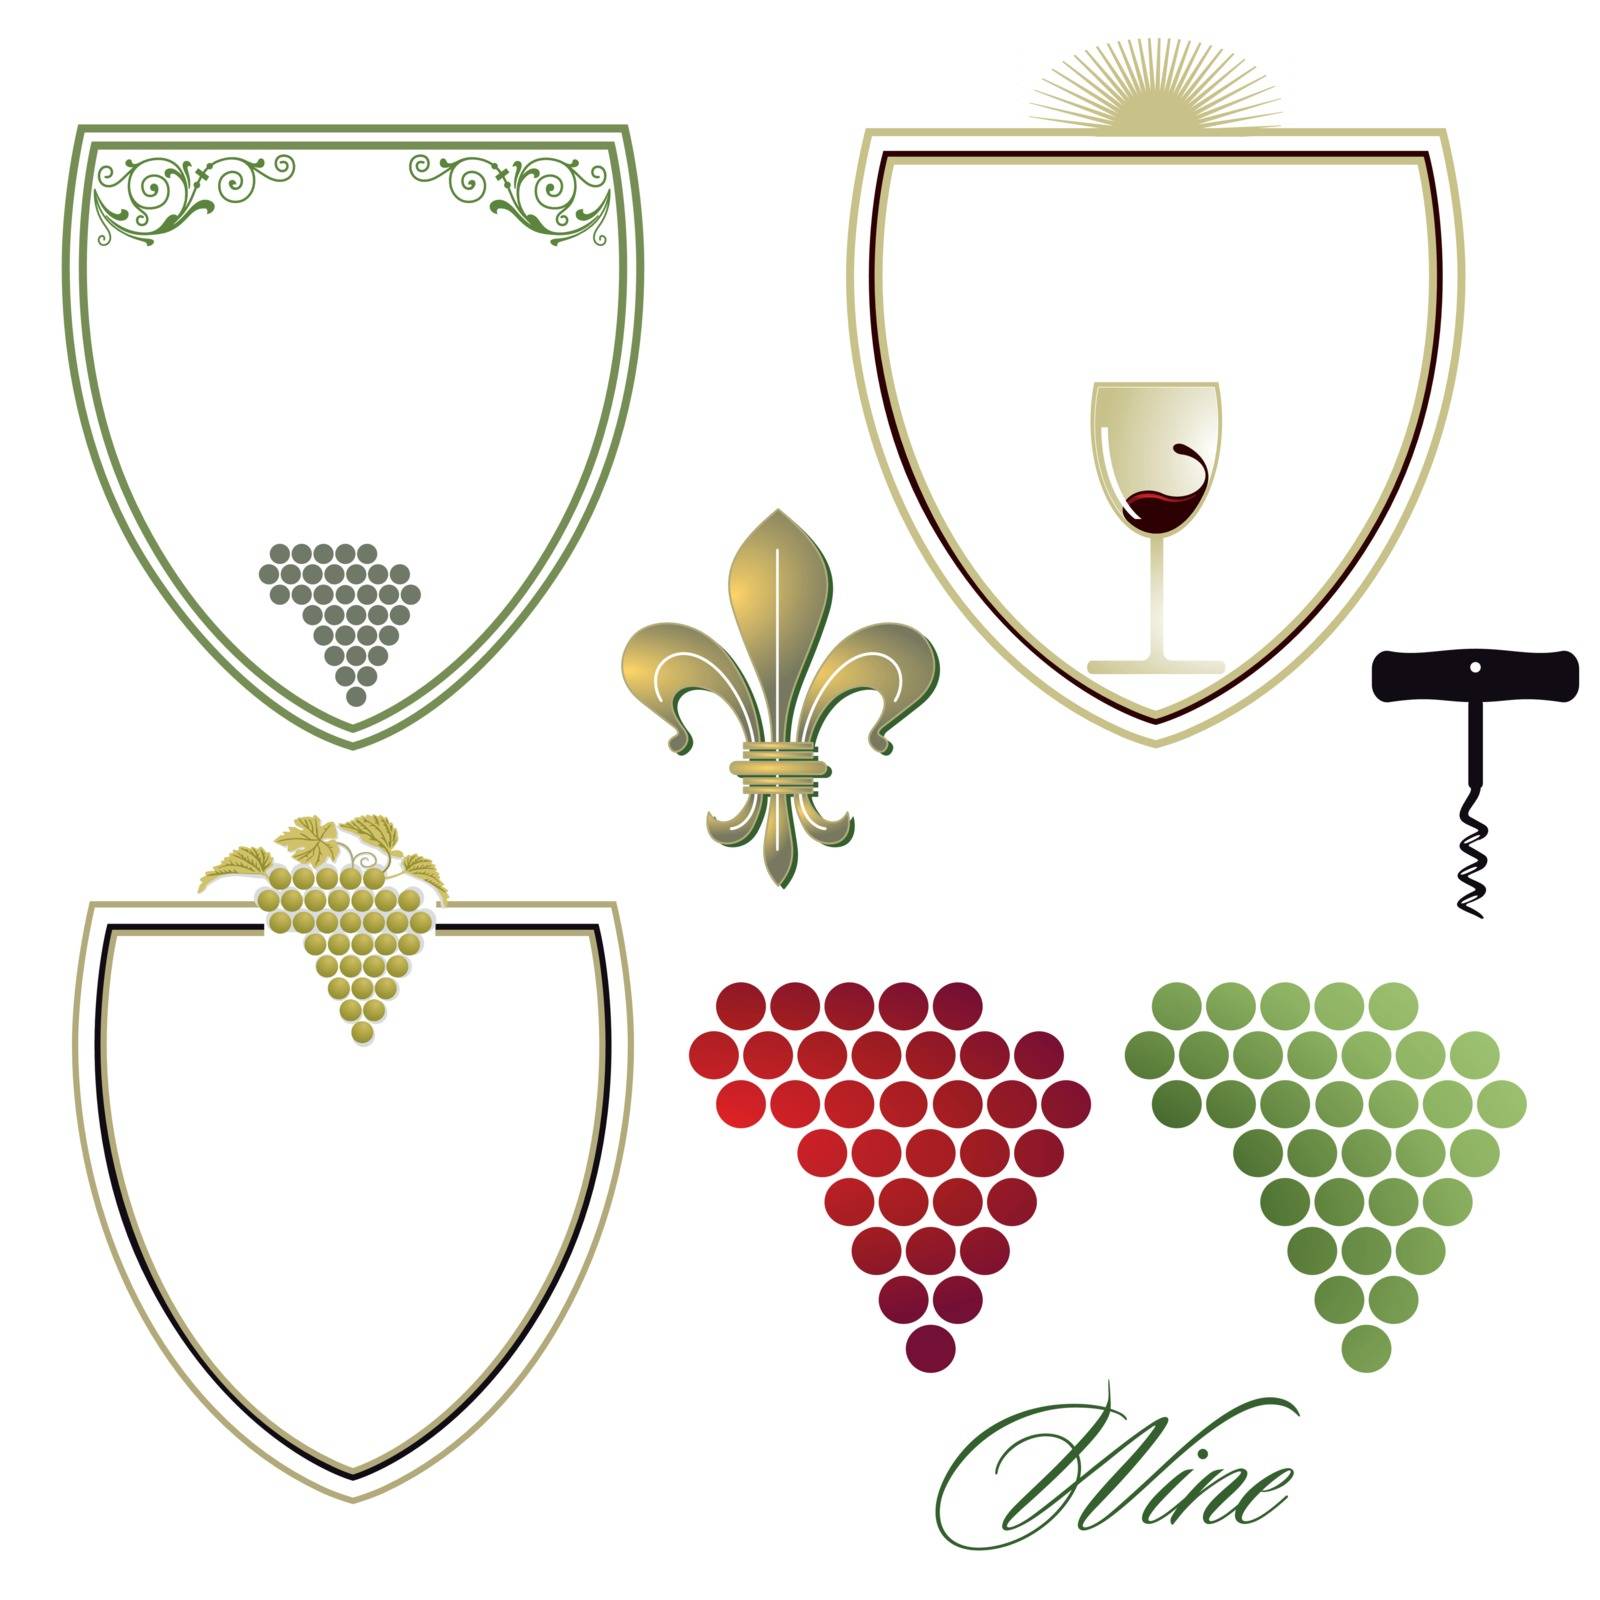 wine characters by scusi